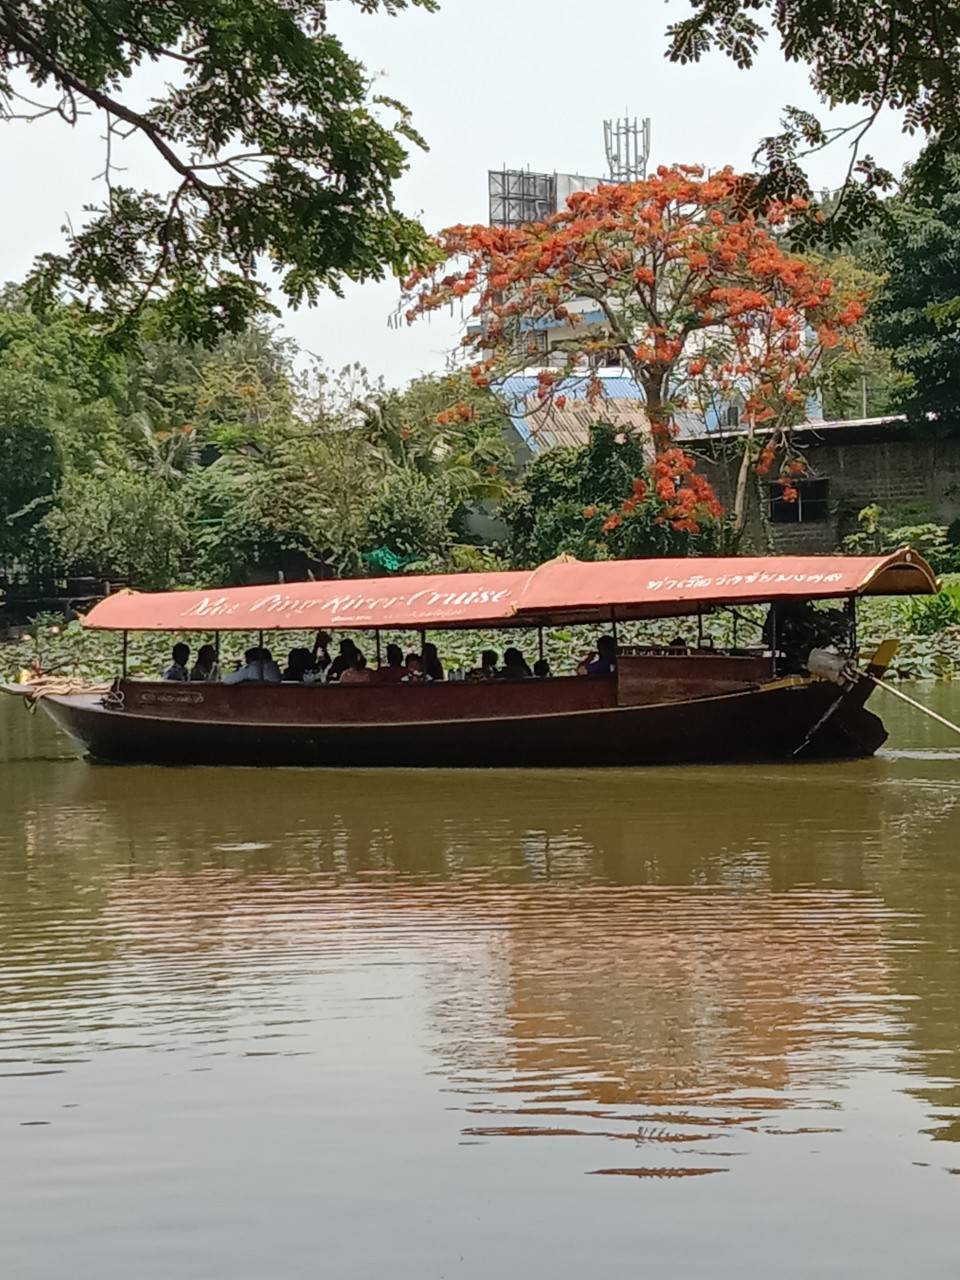 maeping river cruise